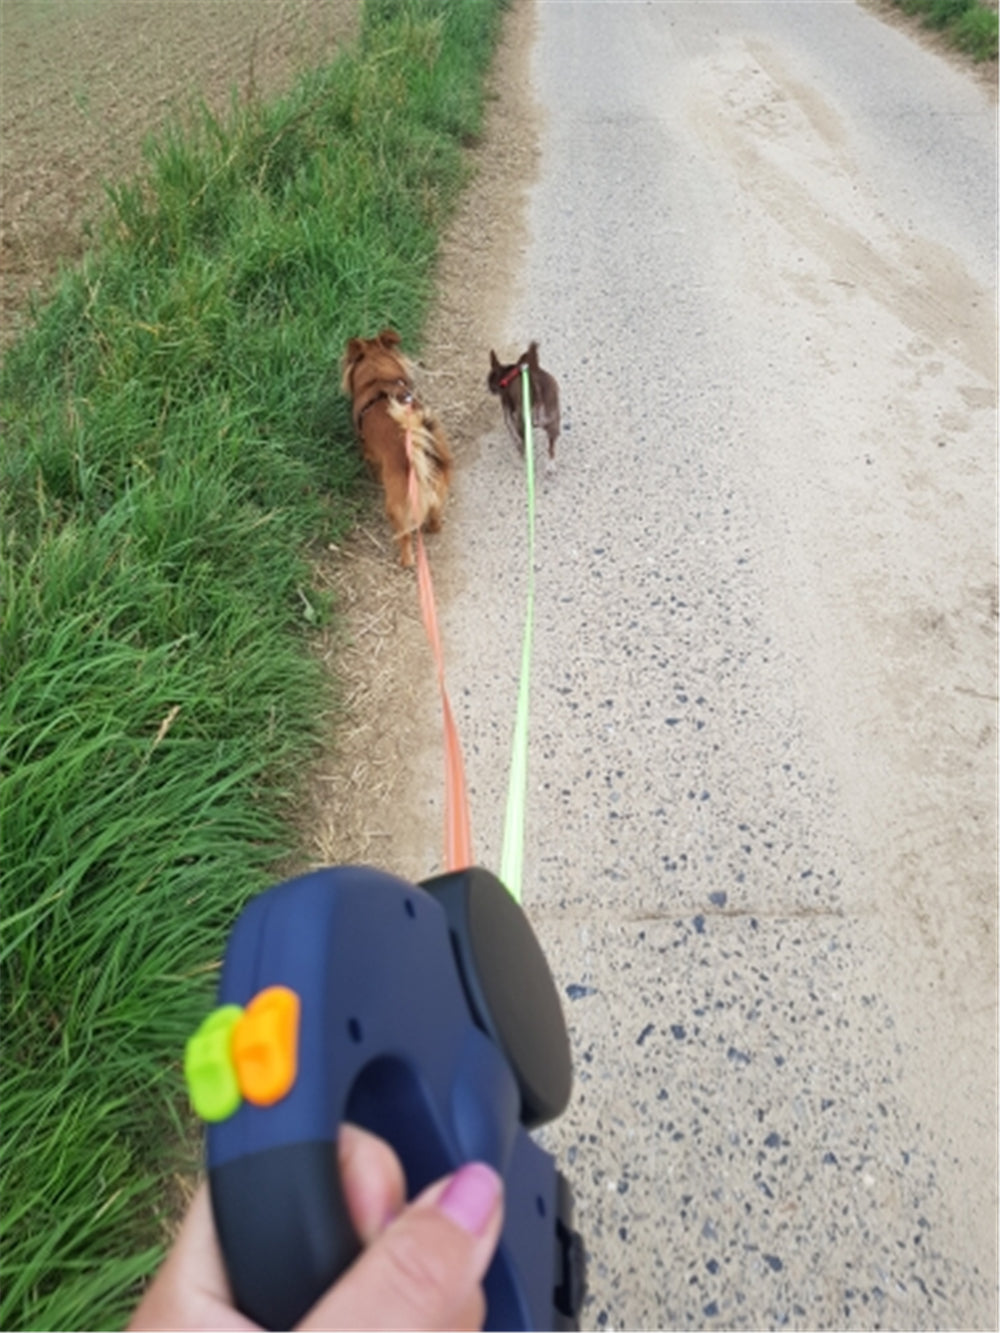 Dual Dog Leashes Rope with Light Retractable